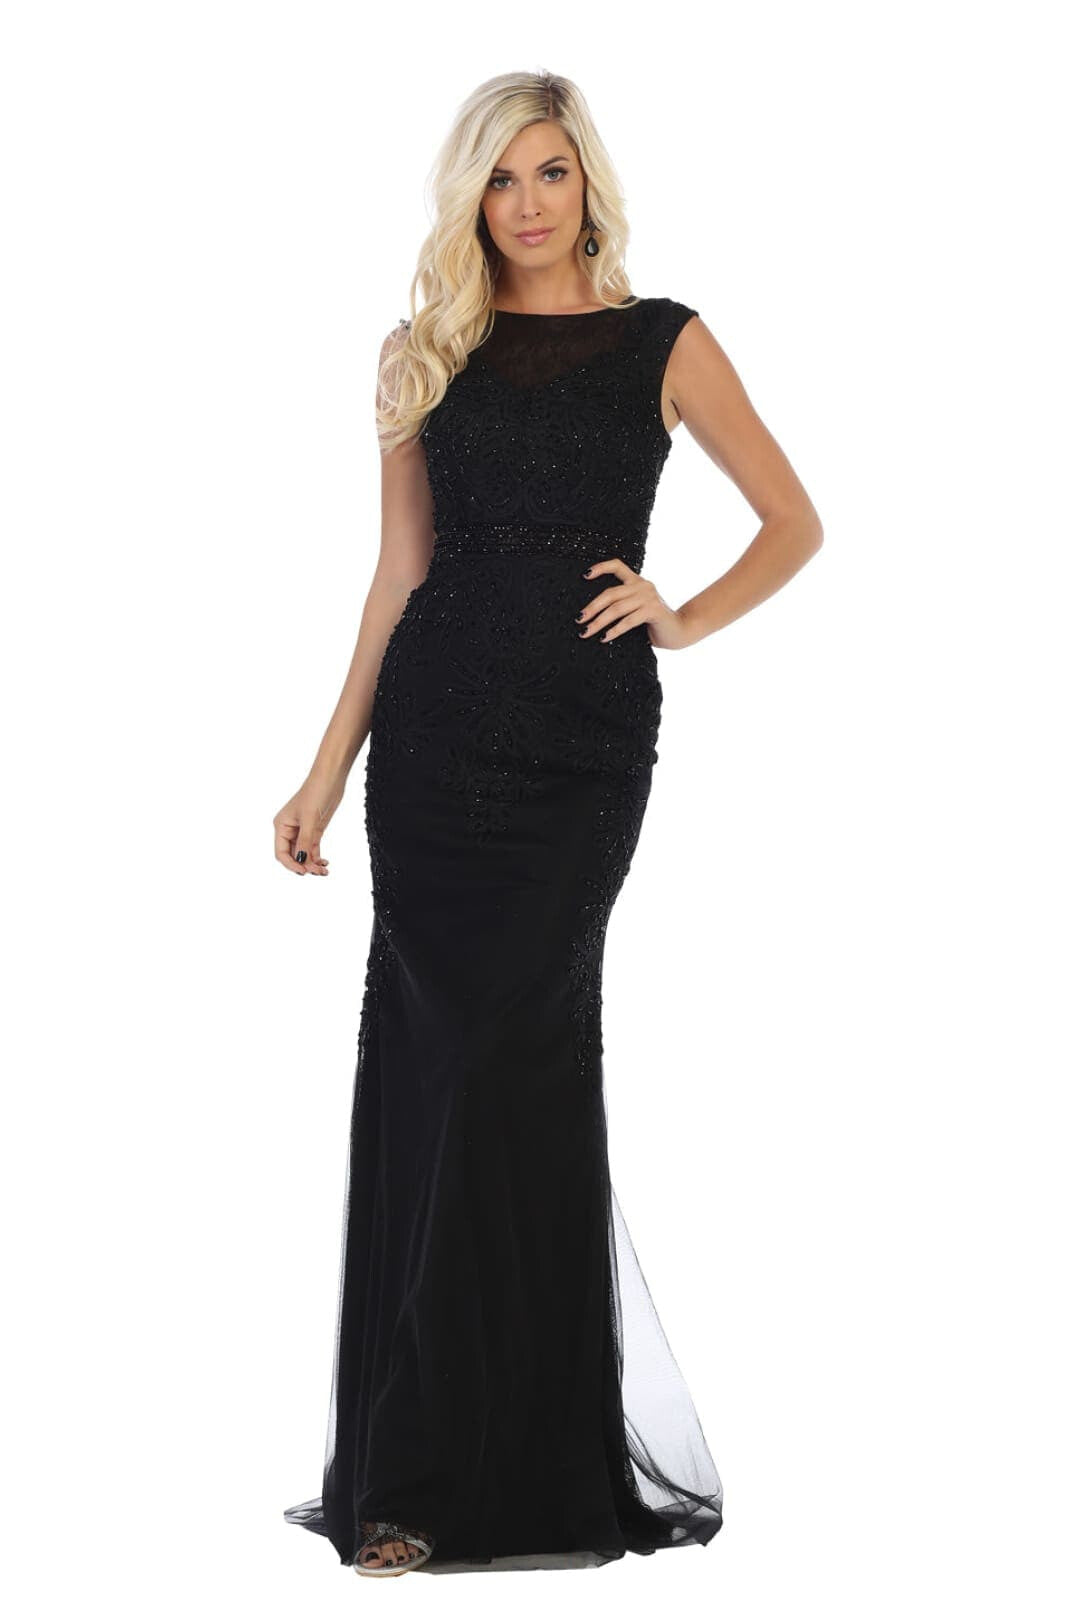 Royal Queen RQ7524 Sleeveless Embellished Long Embroidered Prom Dress - Dress